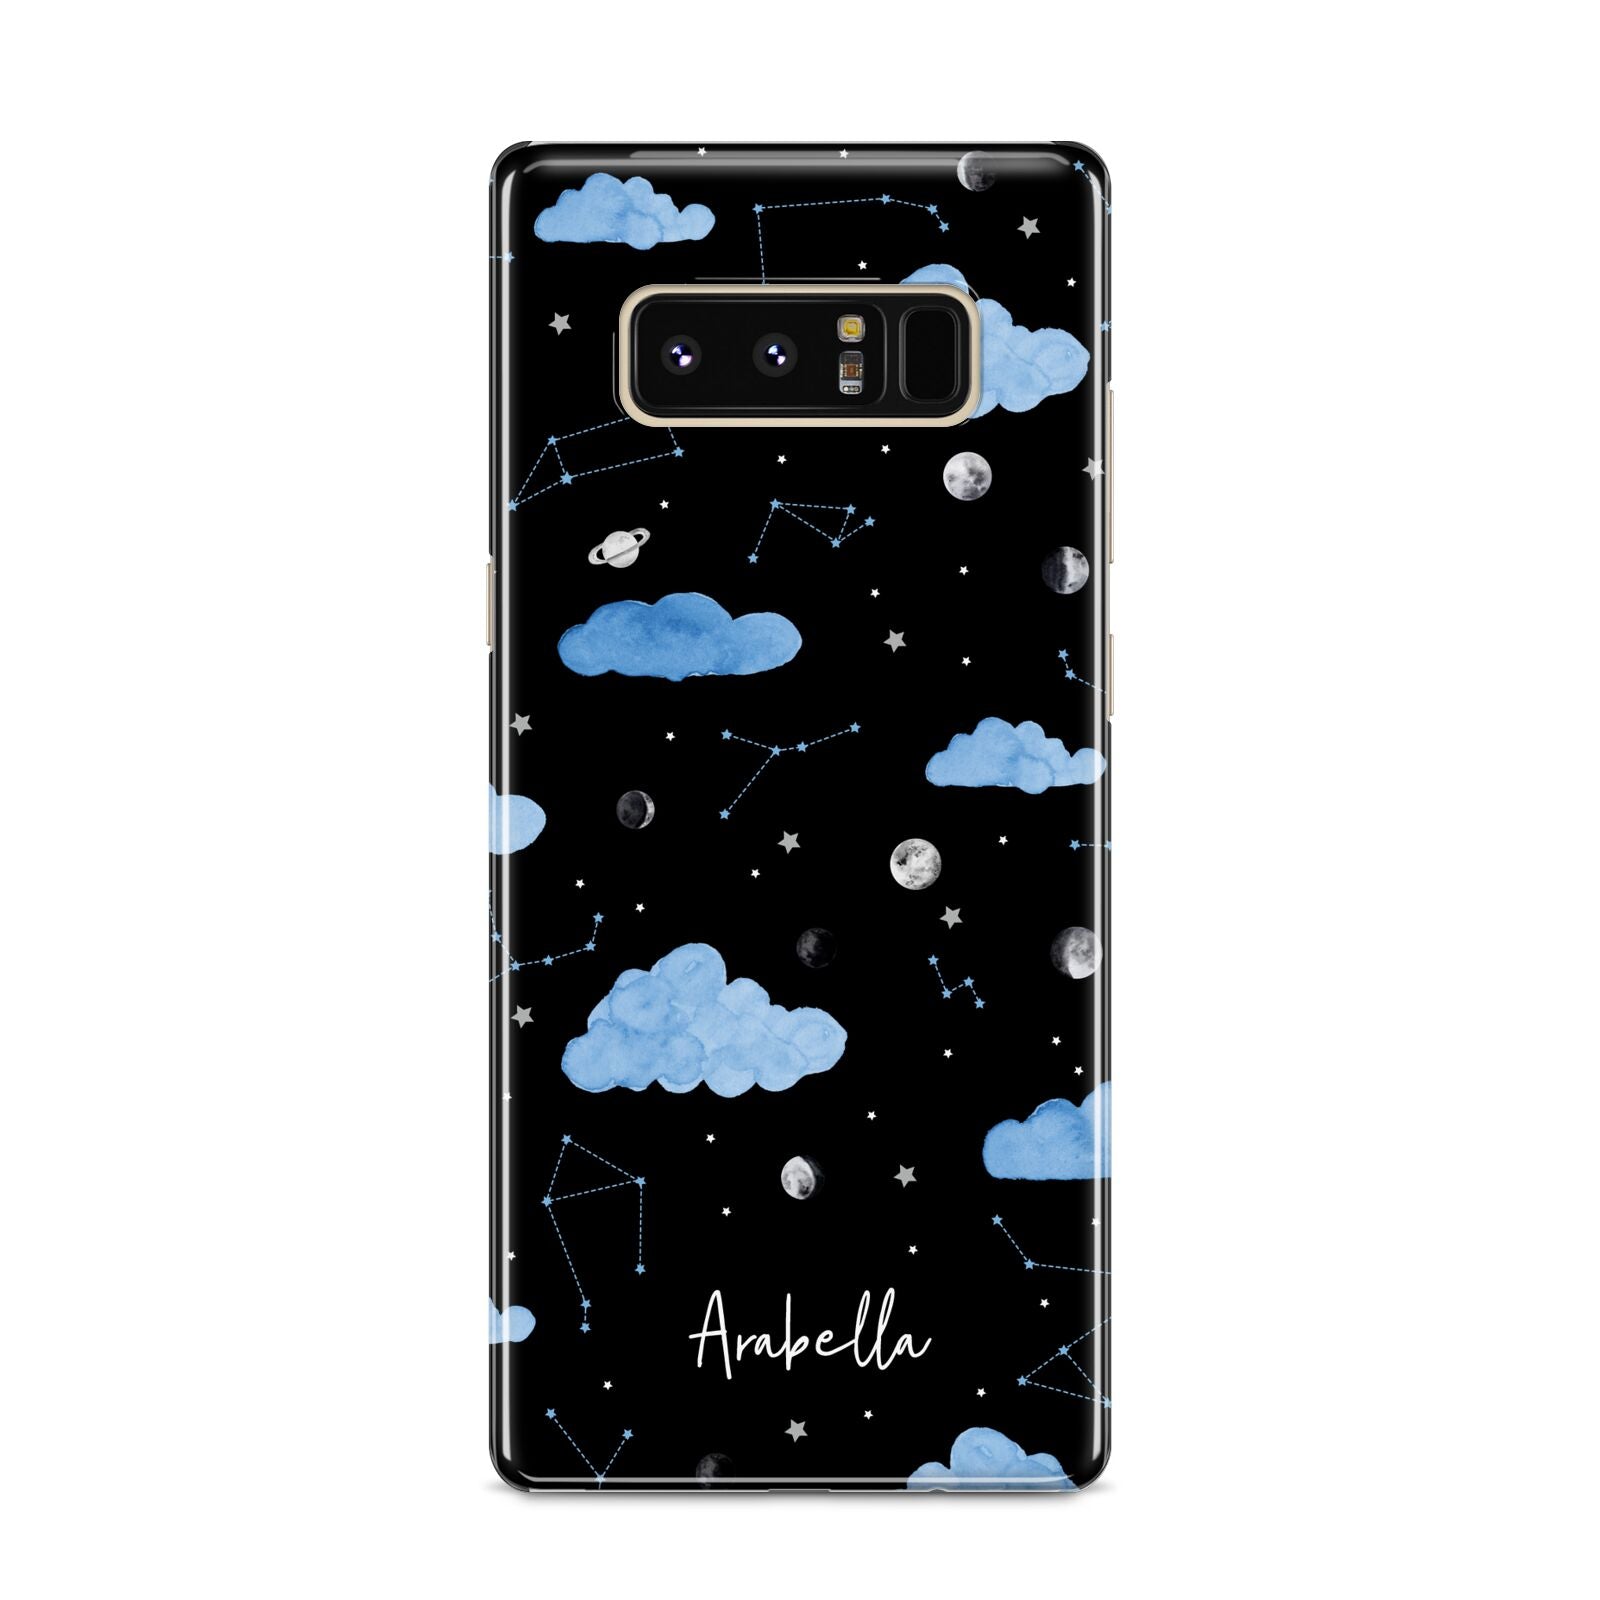 Cloudy Night Sky with Name Samsung Galaxy S8 Case